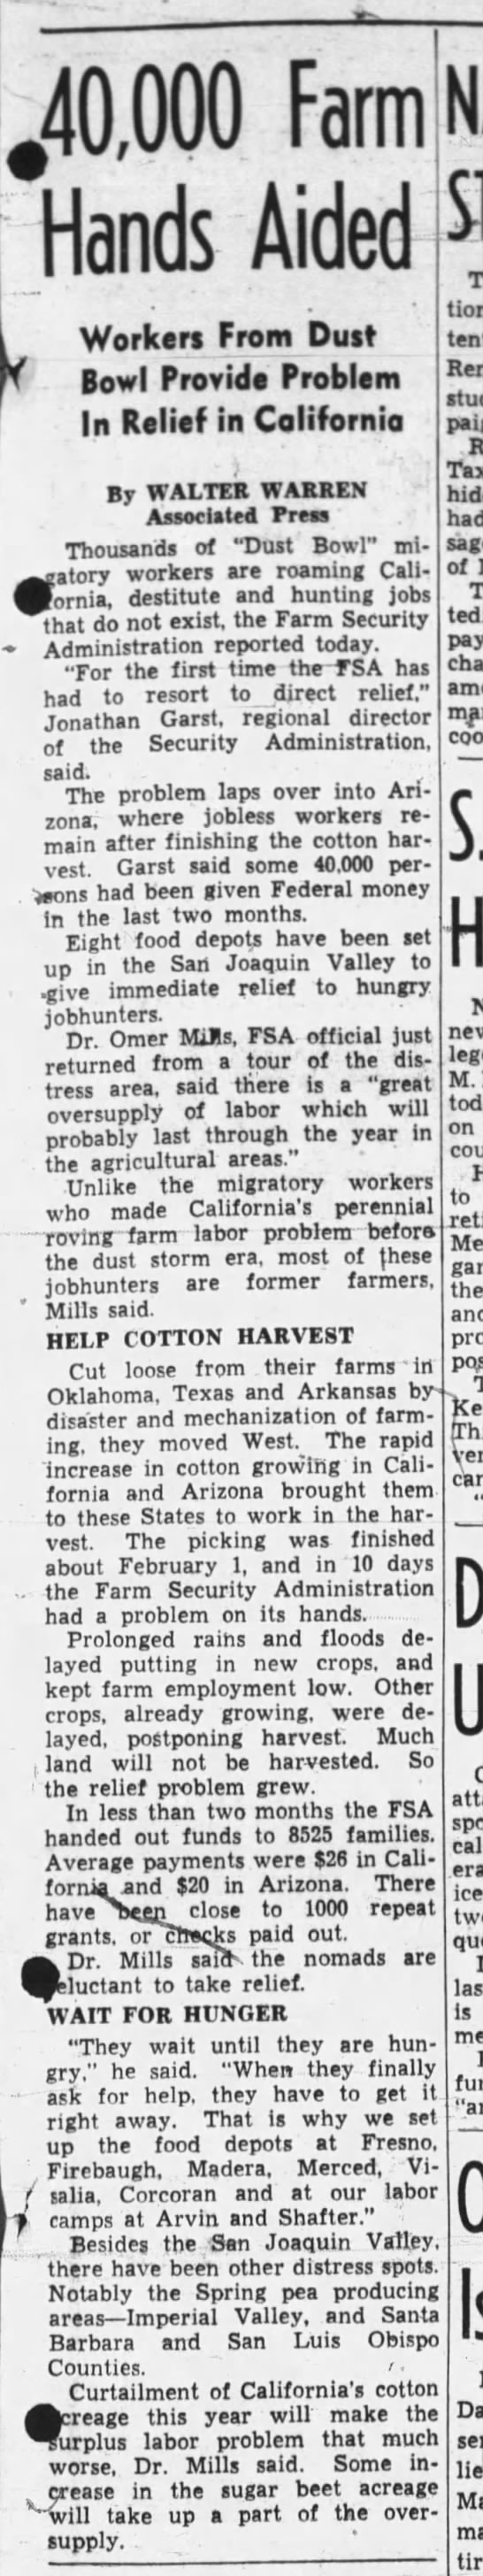 "Workers from Dust Bowl Provide Problem in Relief in California" - 